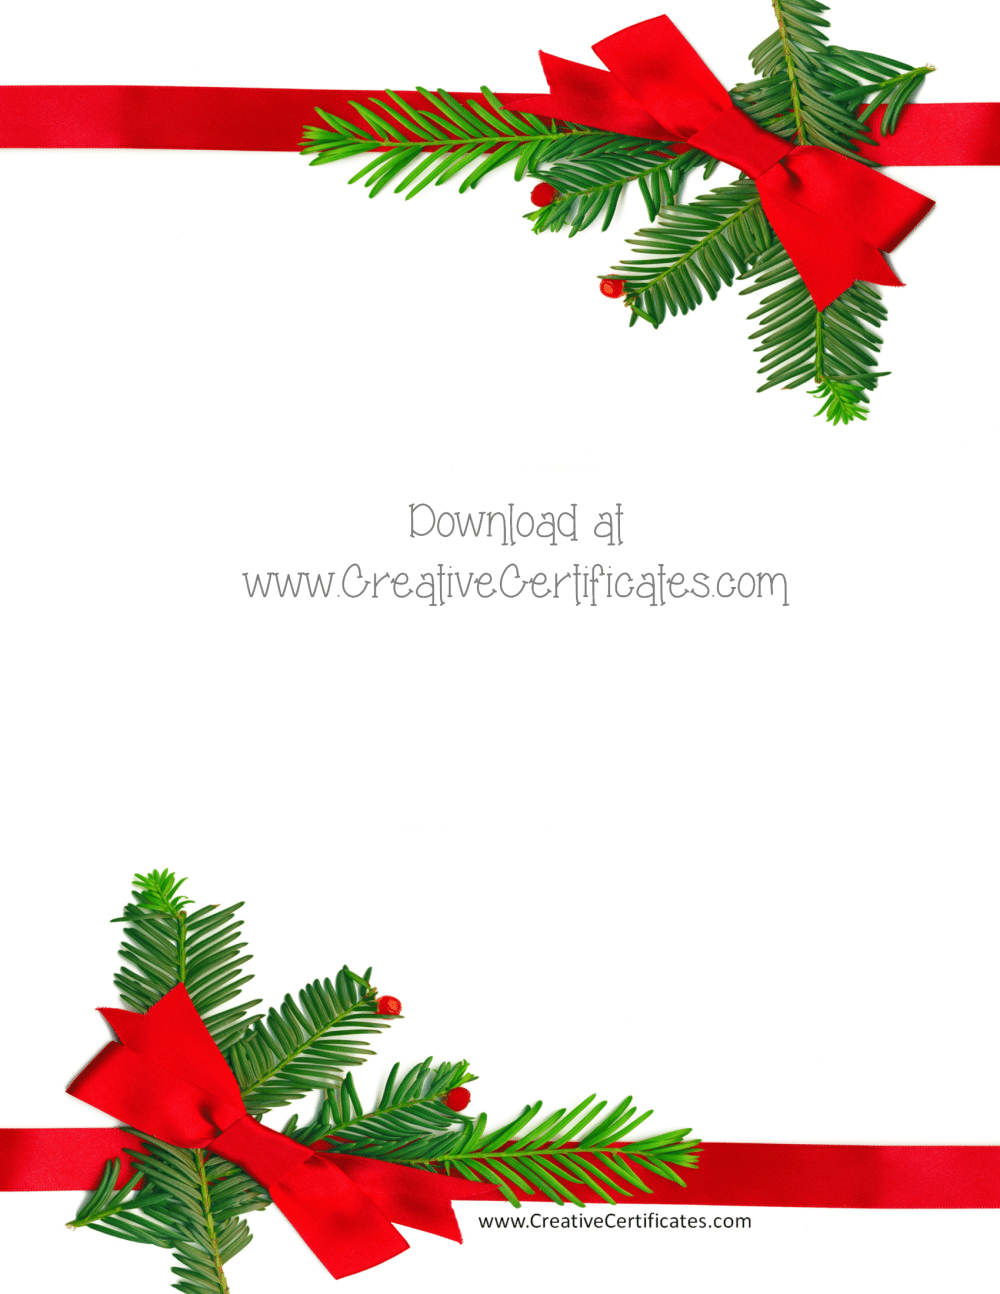 Free Christmas Border Templates Customize Online or Print as is